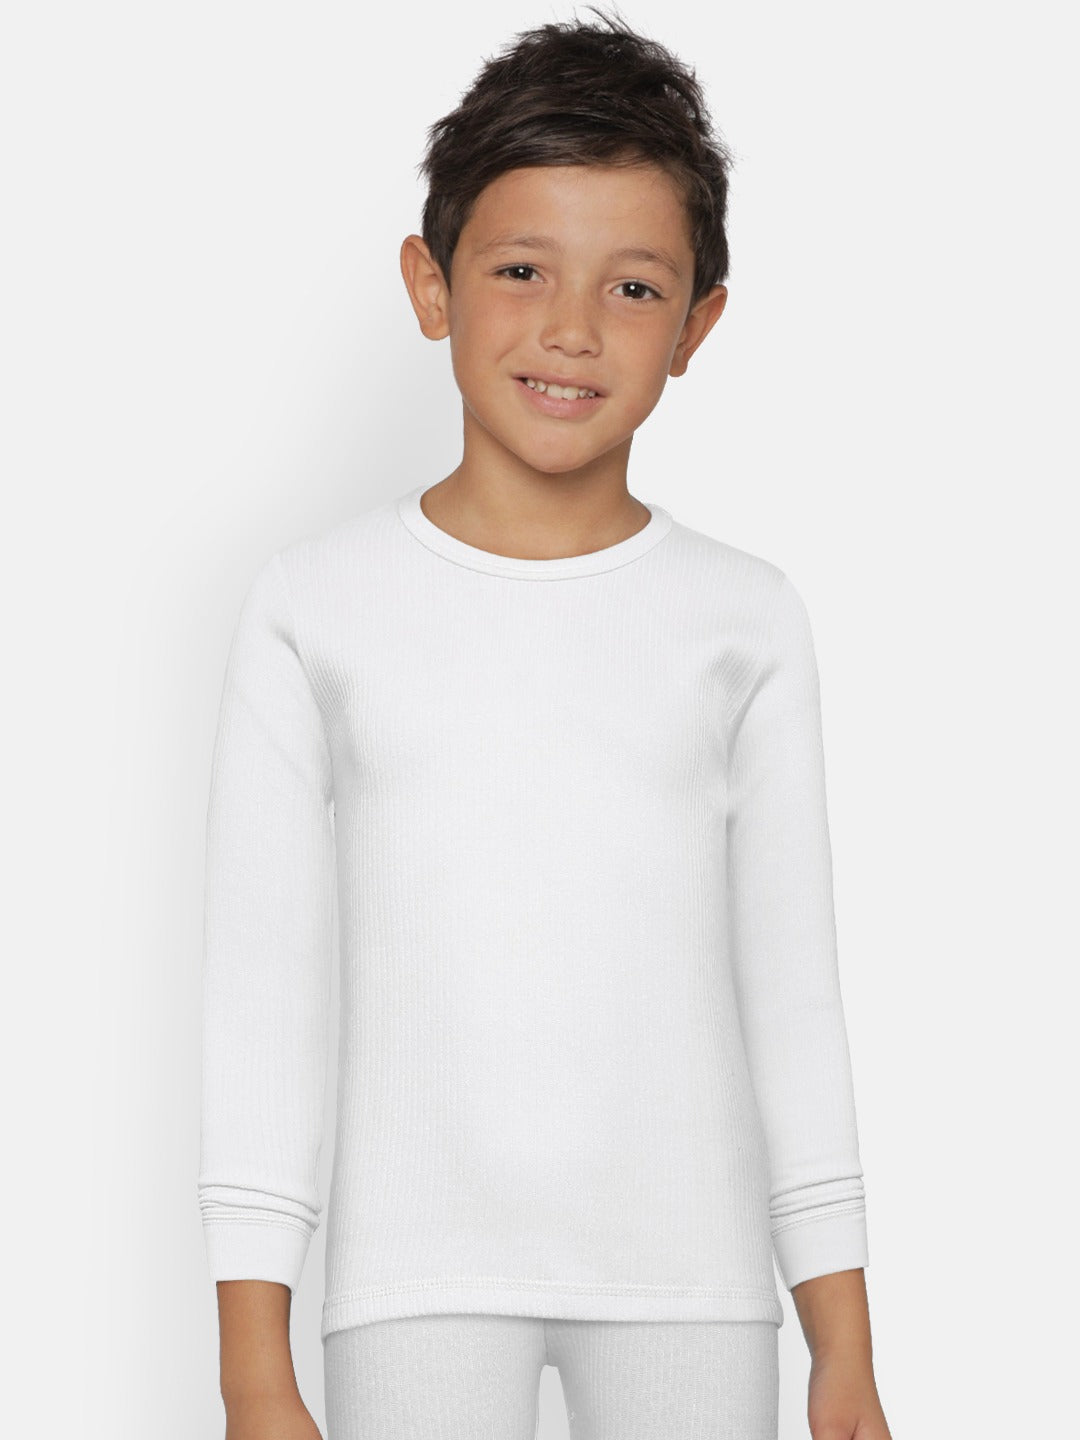 BOYS THERMALS_T2340B2340WHITE